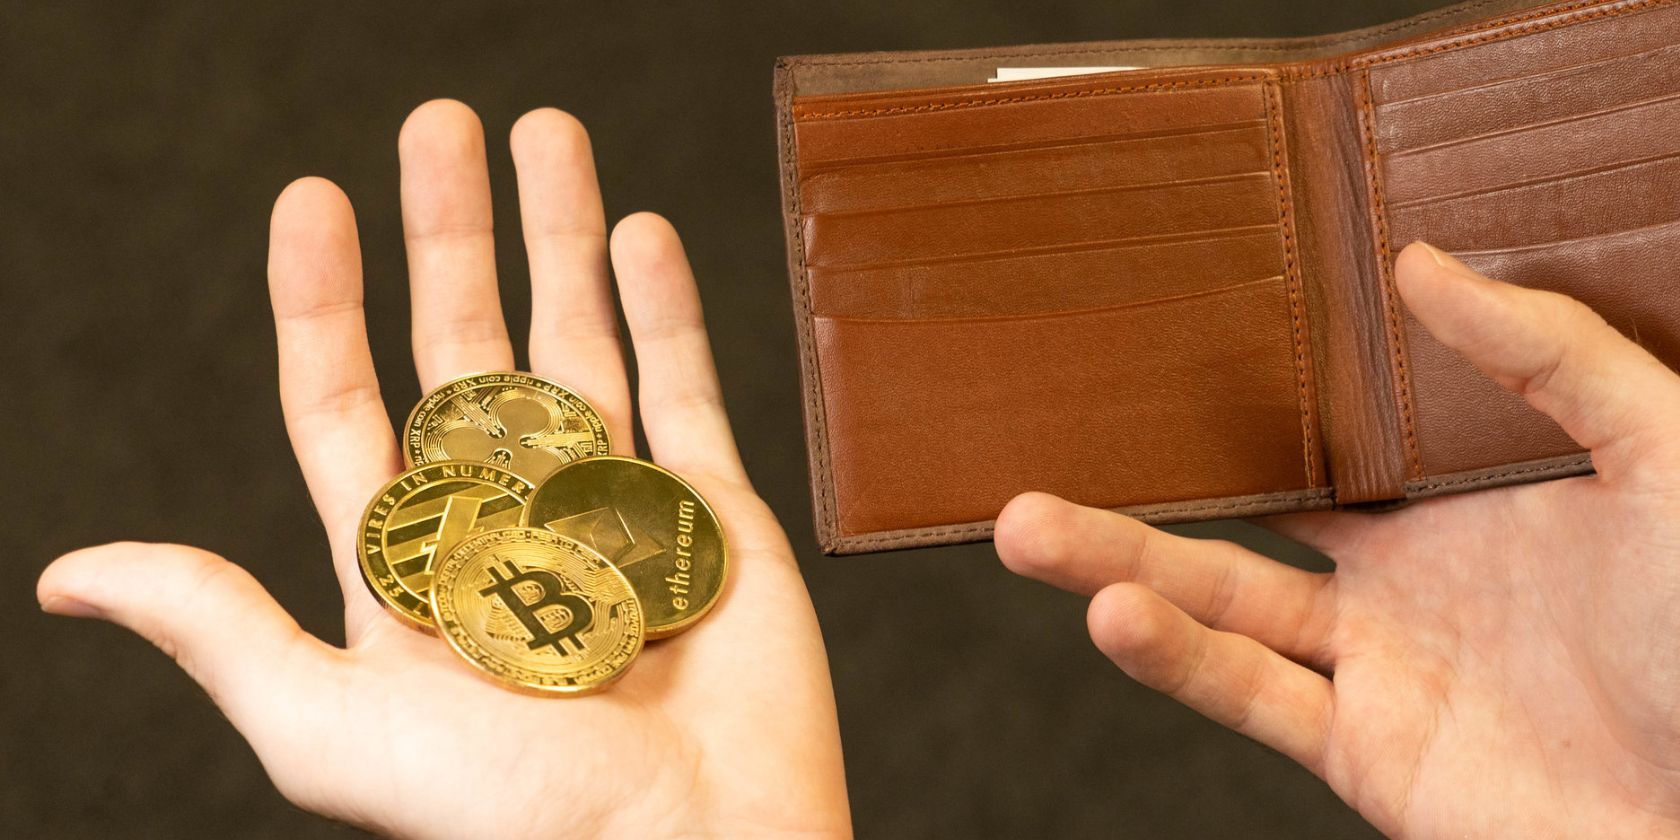 various crypto coins in hand next to leather wallet